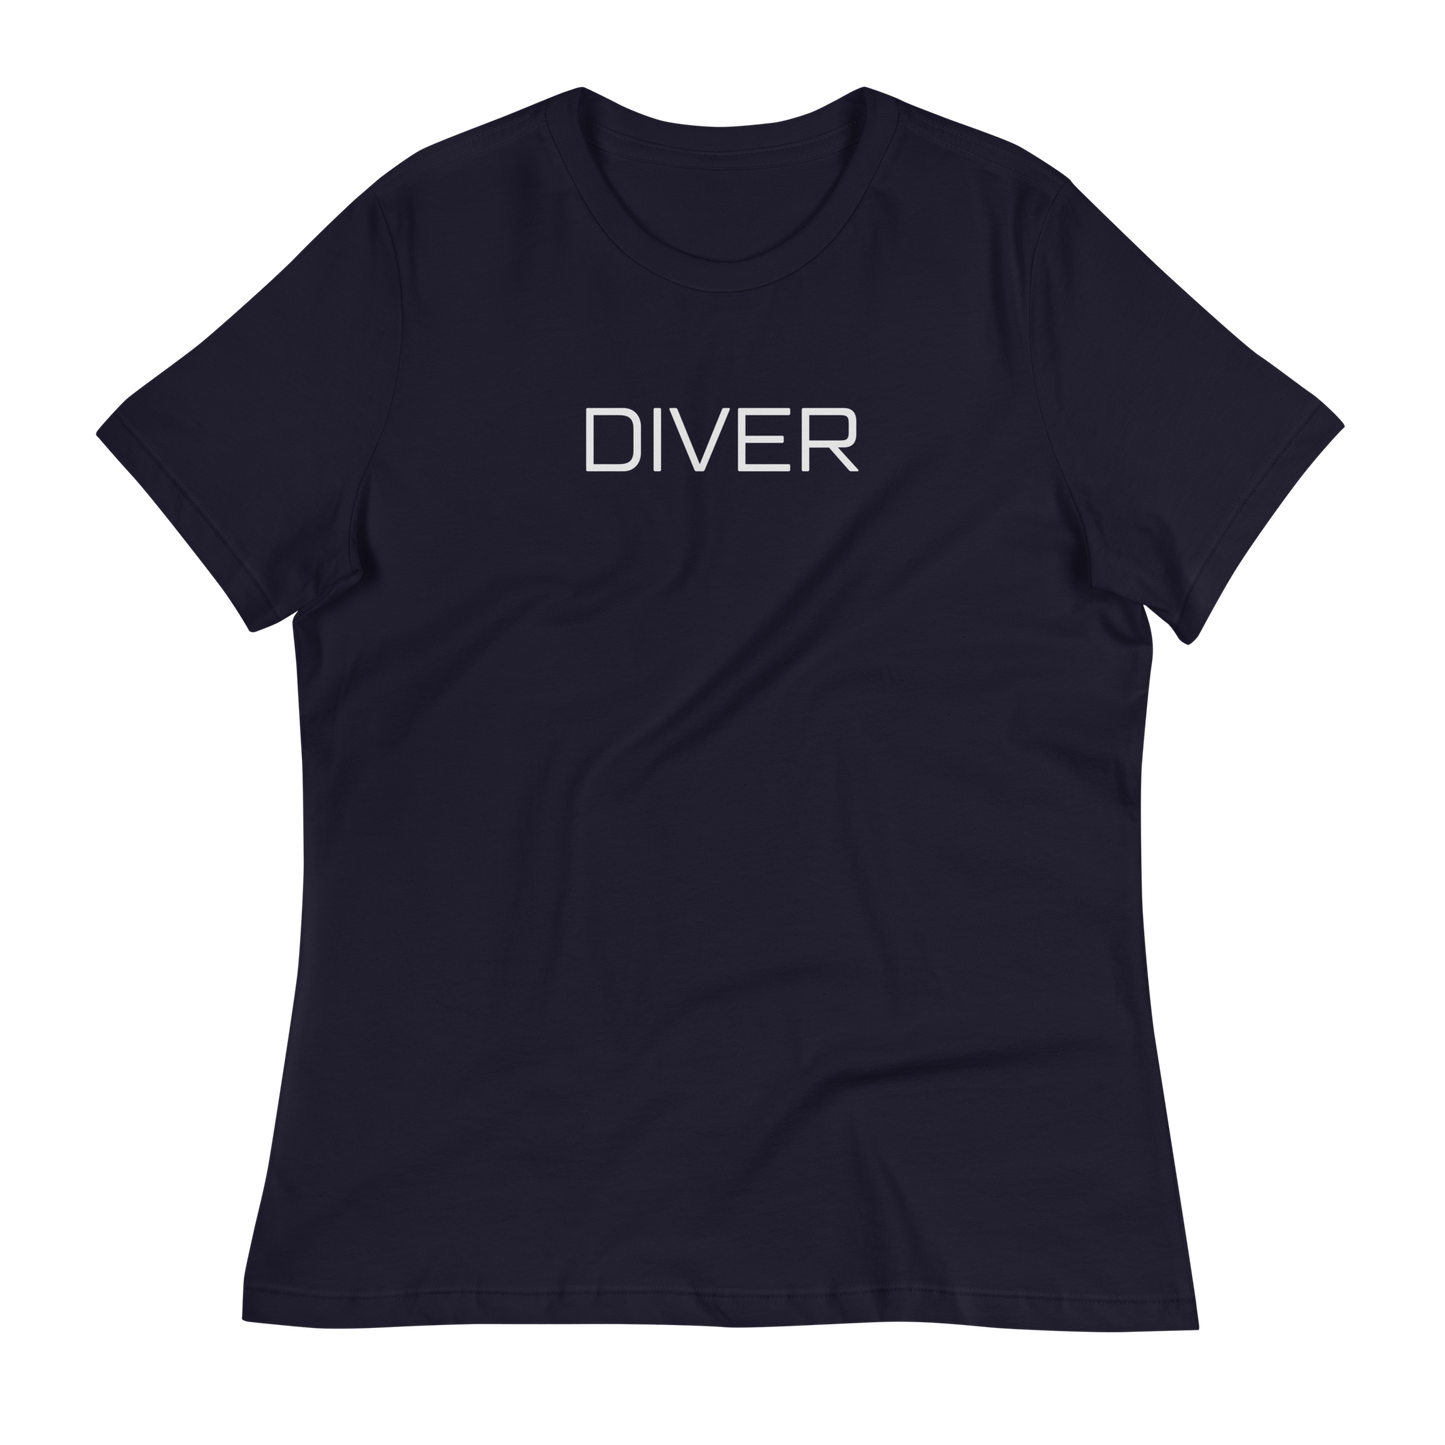 The DIVER Relaxed Fit T-Shirt